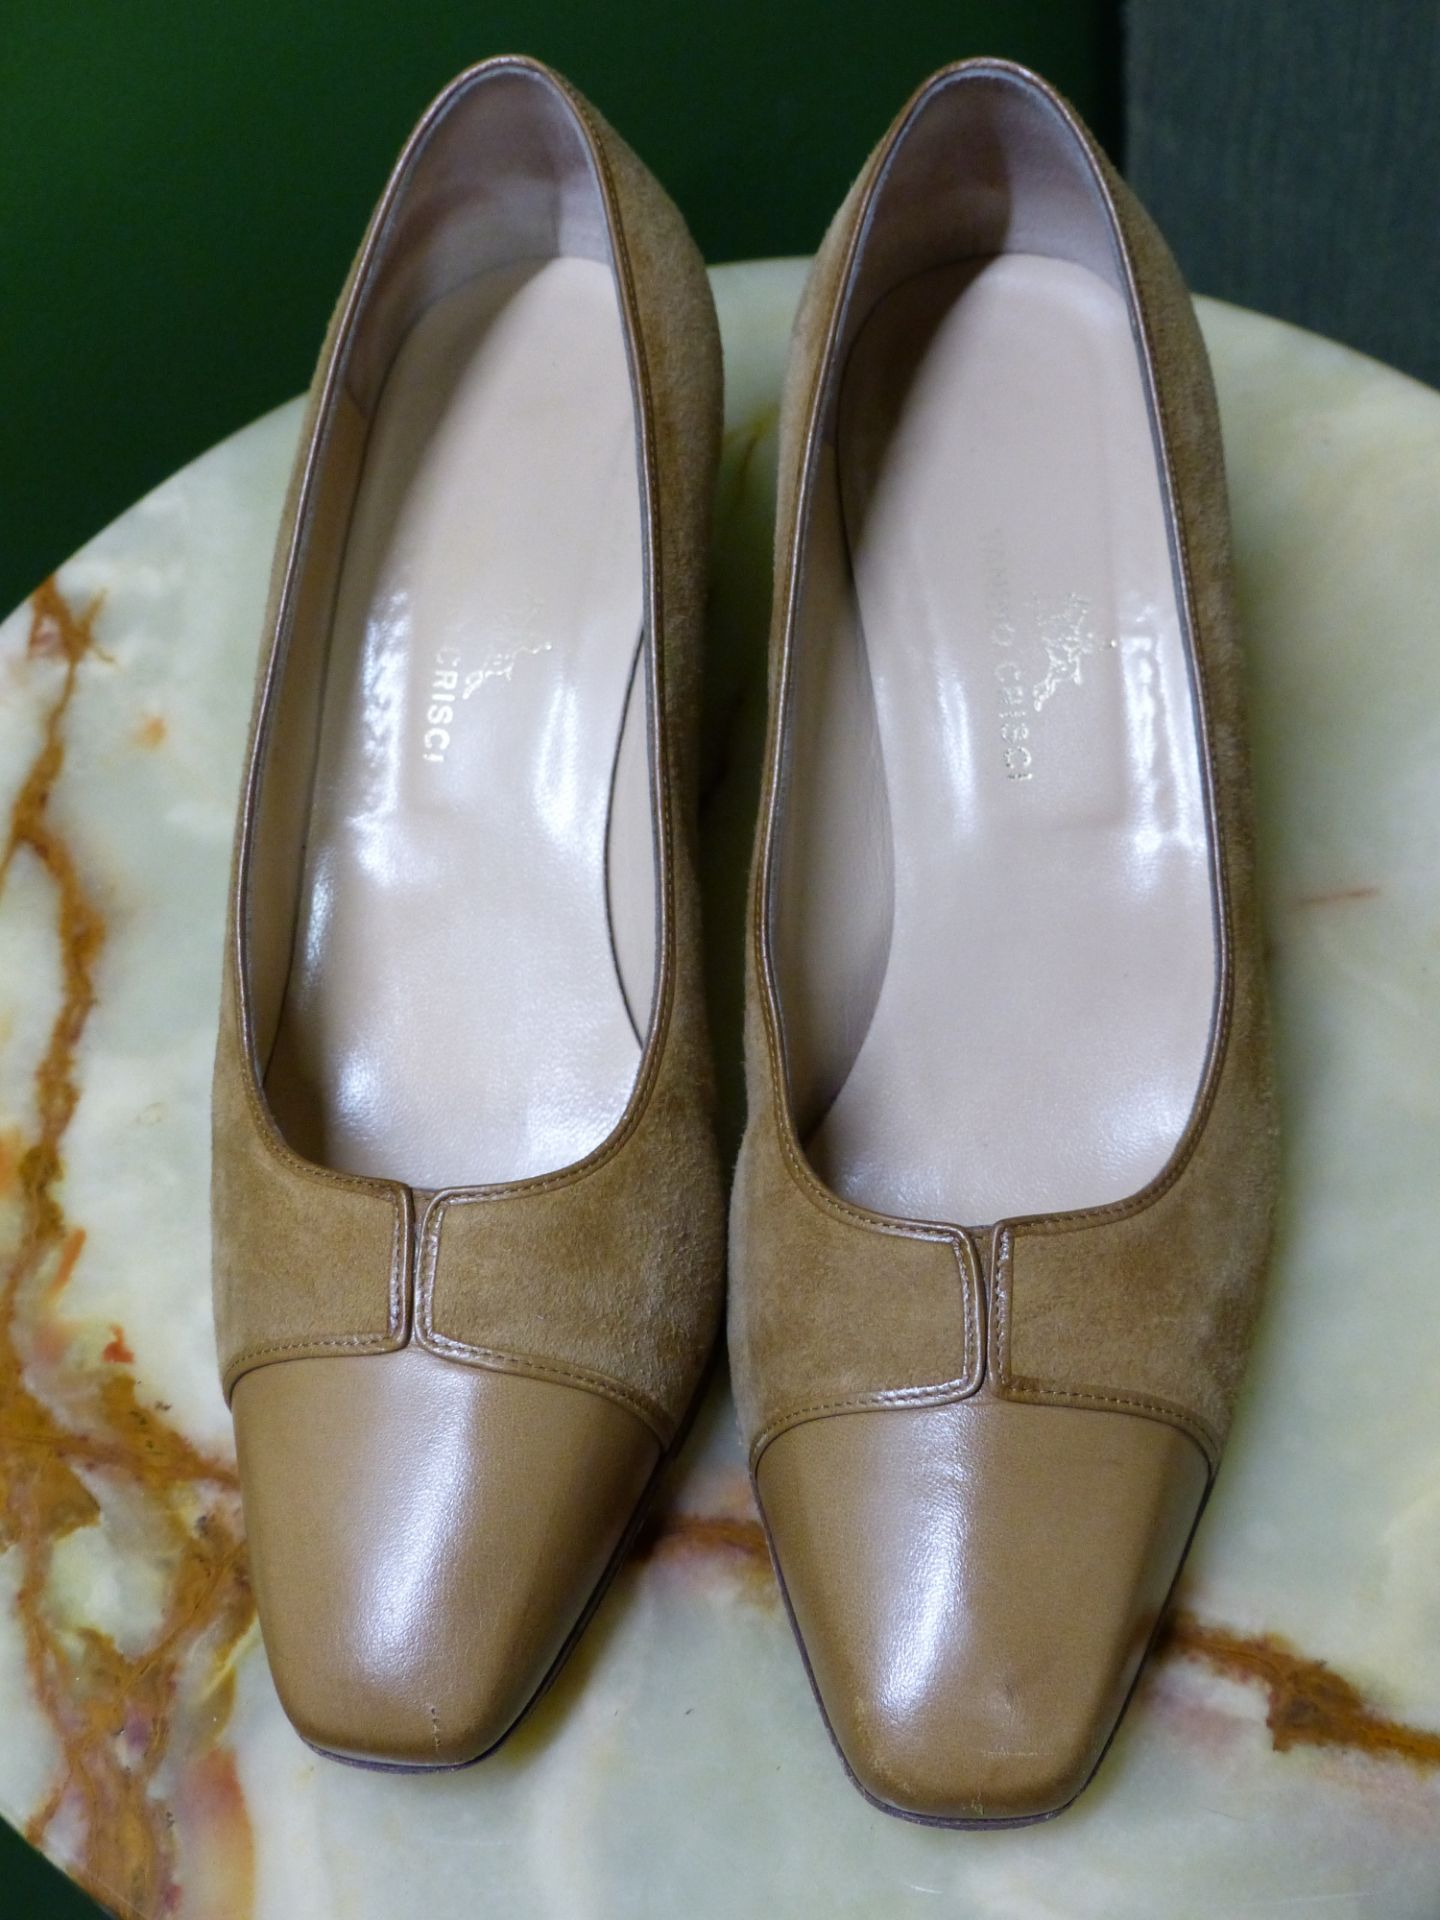 SHOES. TANINO CRISCI LEATHER AND SUEDE CAMEL HEALS EUR SIZE 39. UNUTZER LEATHER BROWN FLATS EUR SIZE - Image 5 of 8